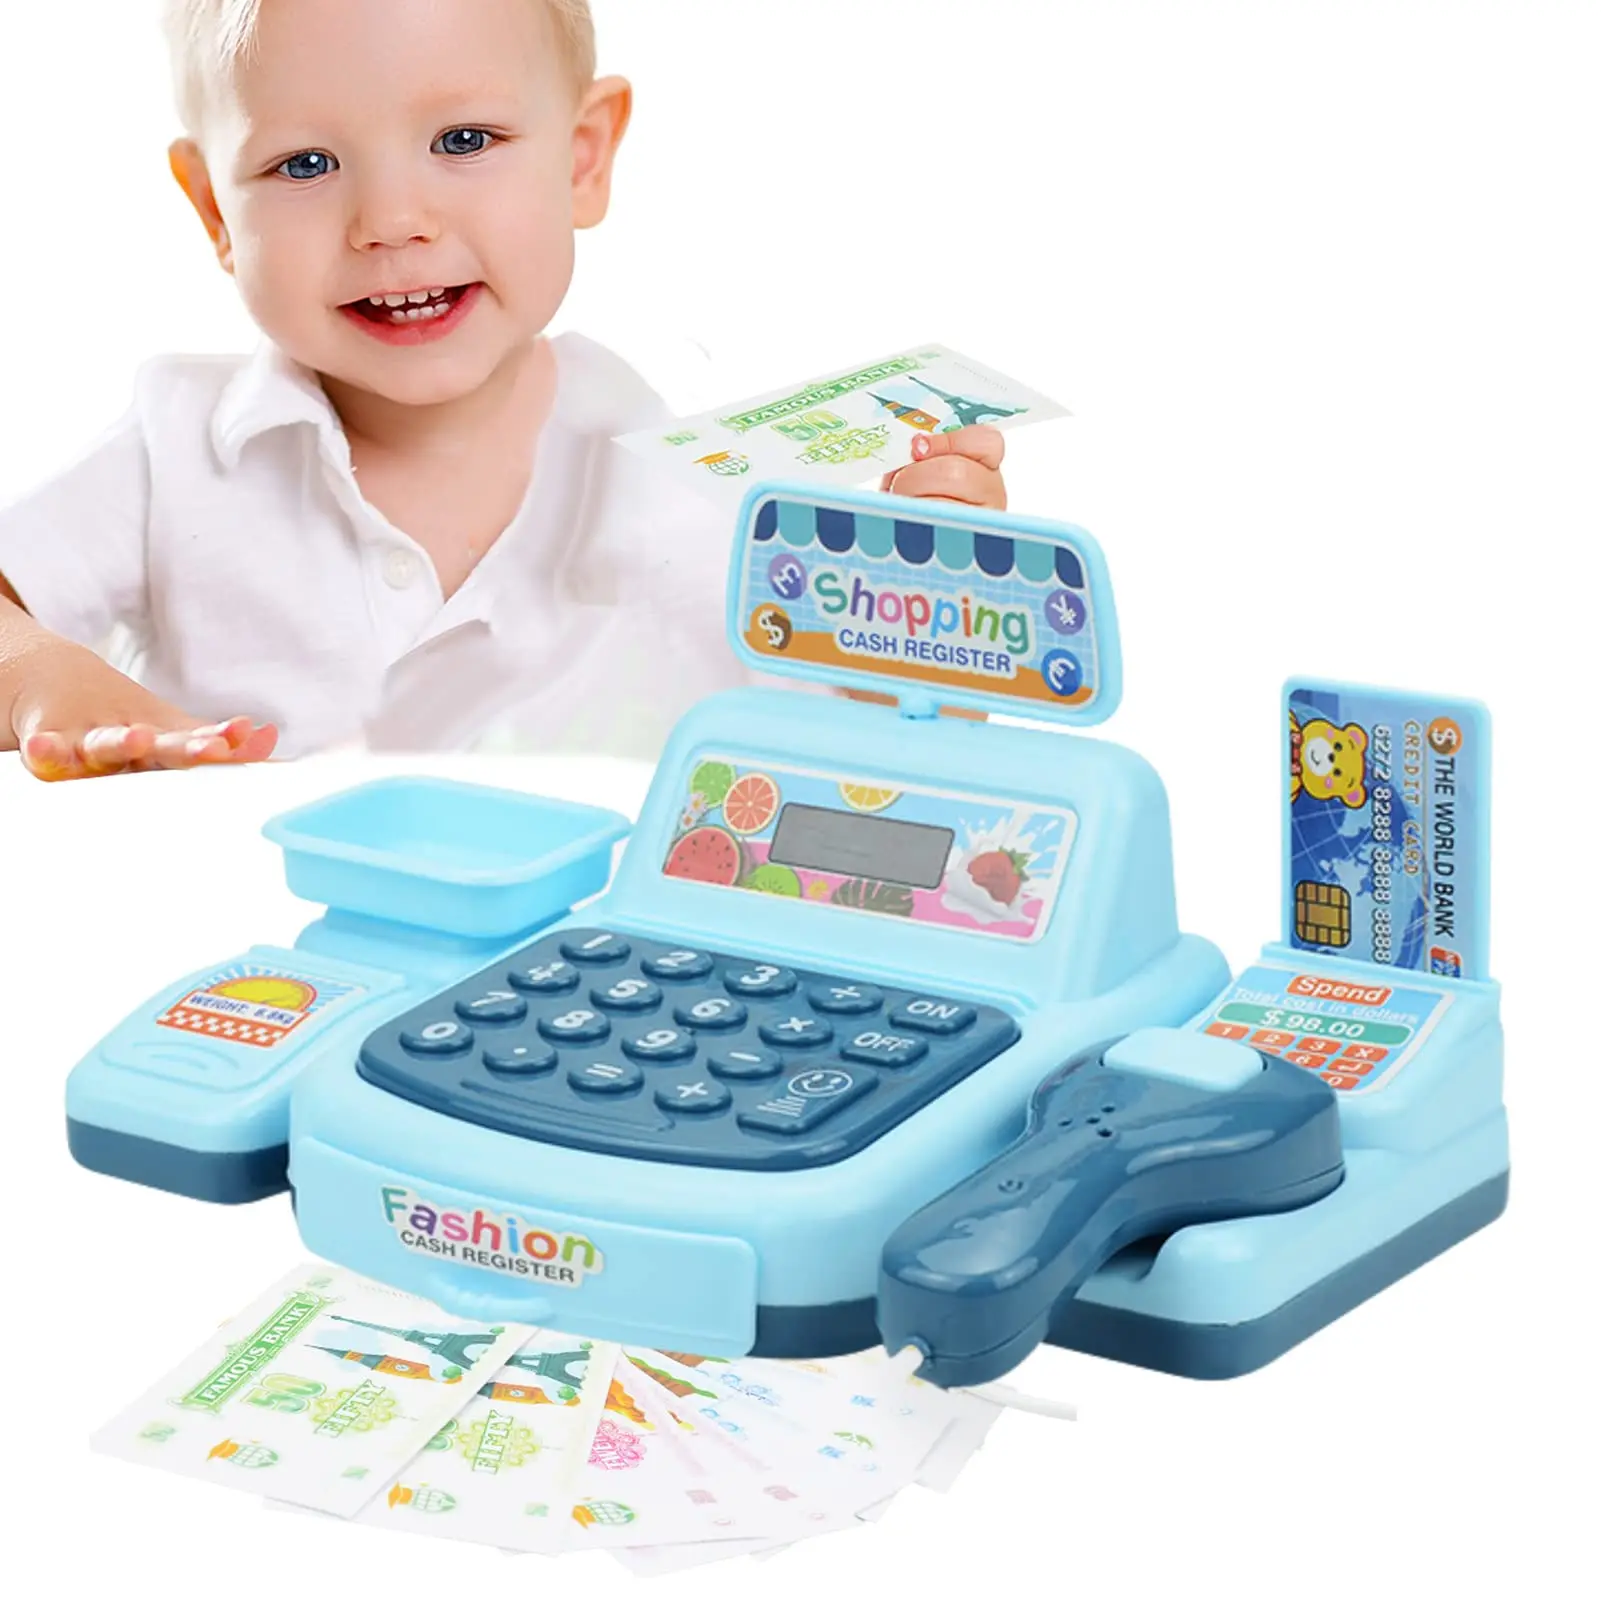 

Cash Register Toy for Pretend Play Supermarket Checkout with Light and Sound Electric ATM Gift for Toddlers Kids